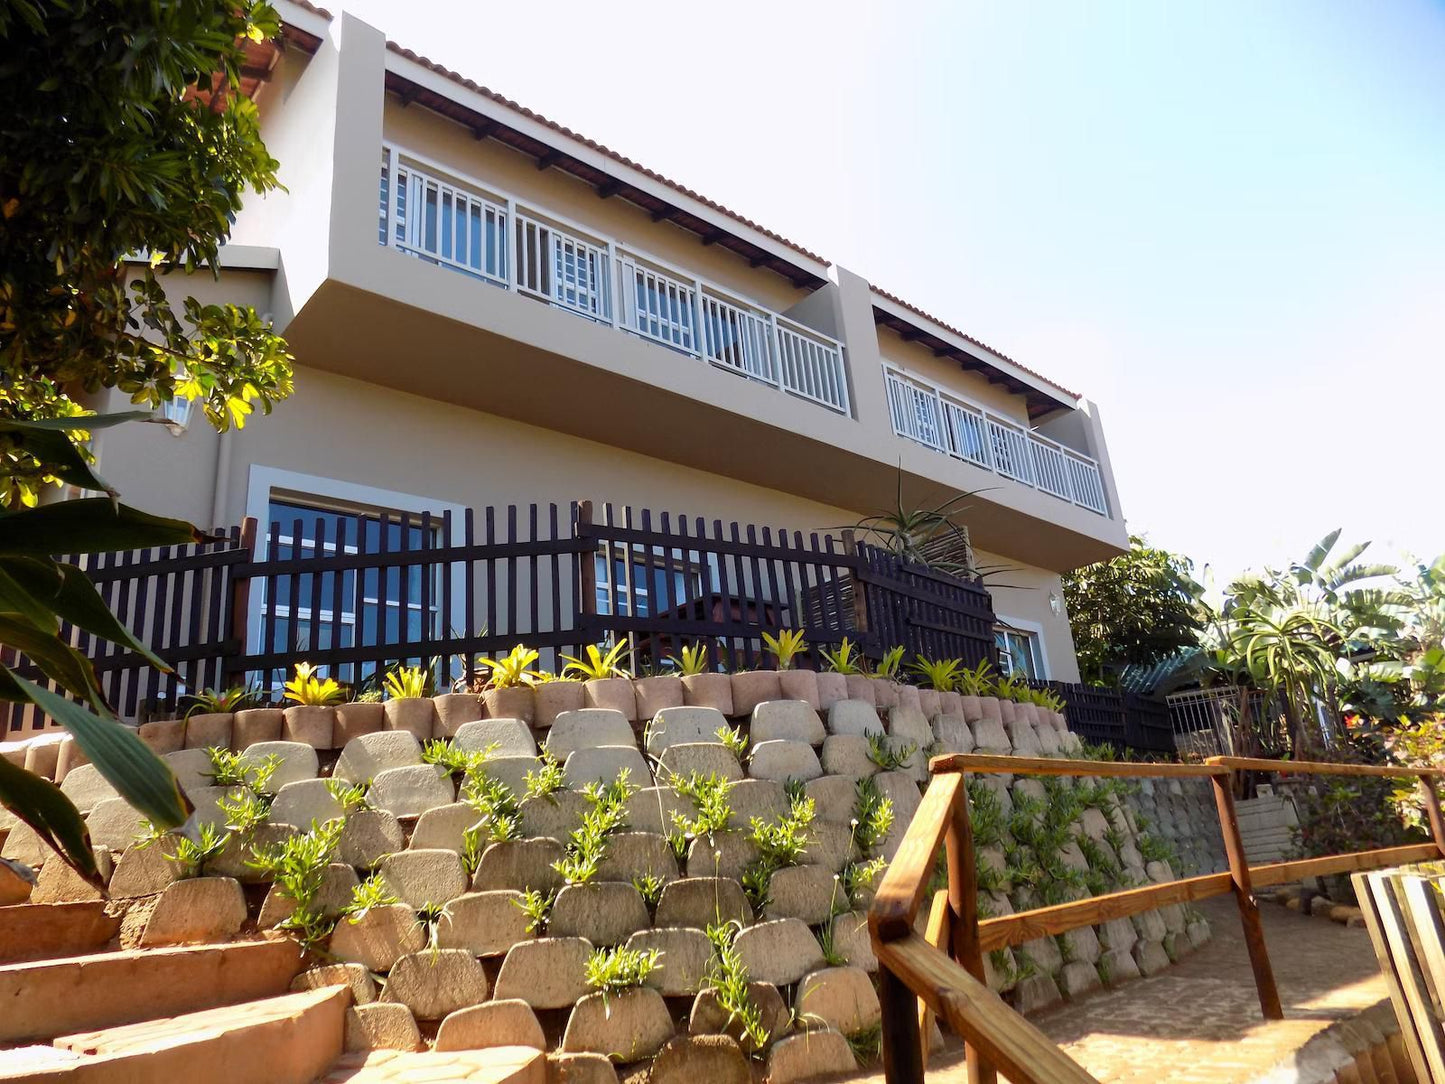 Silver Tides Seaside Accommodation Ocean View Durban Durban Kwazulu Natal South Africa Balcony, Architecture, House, Building